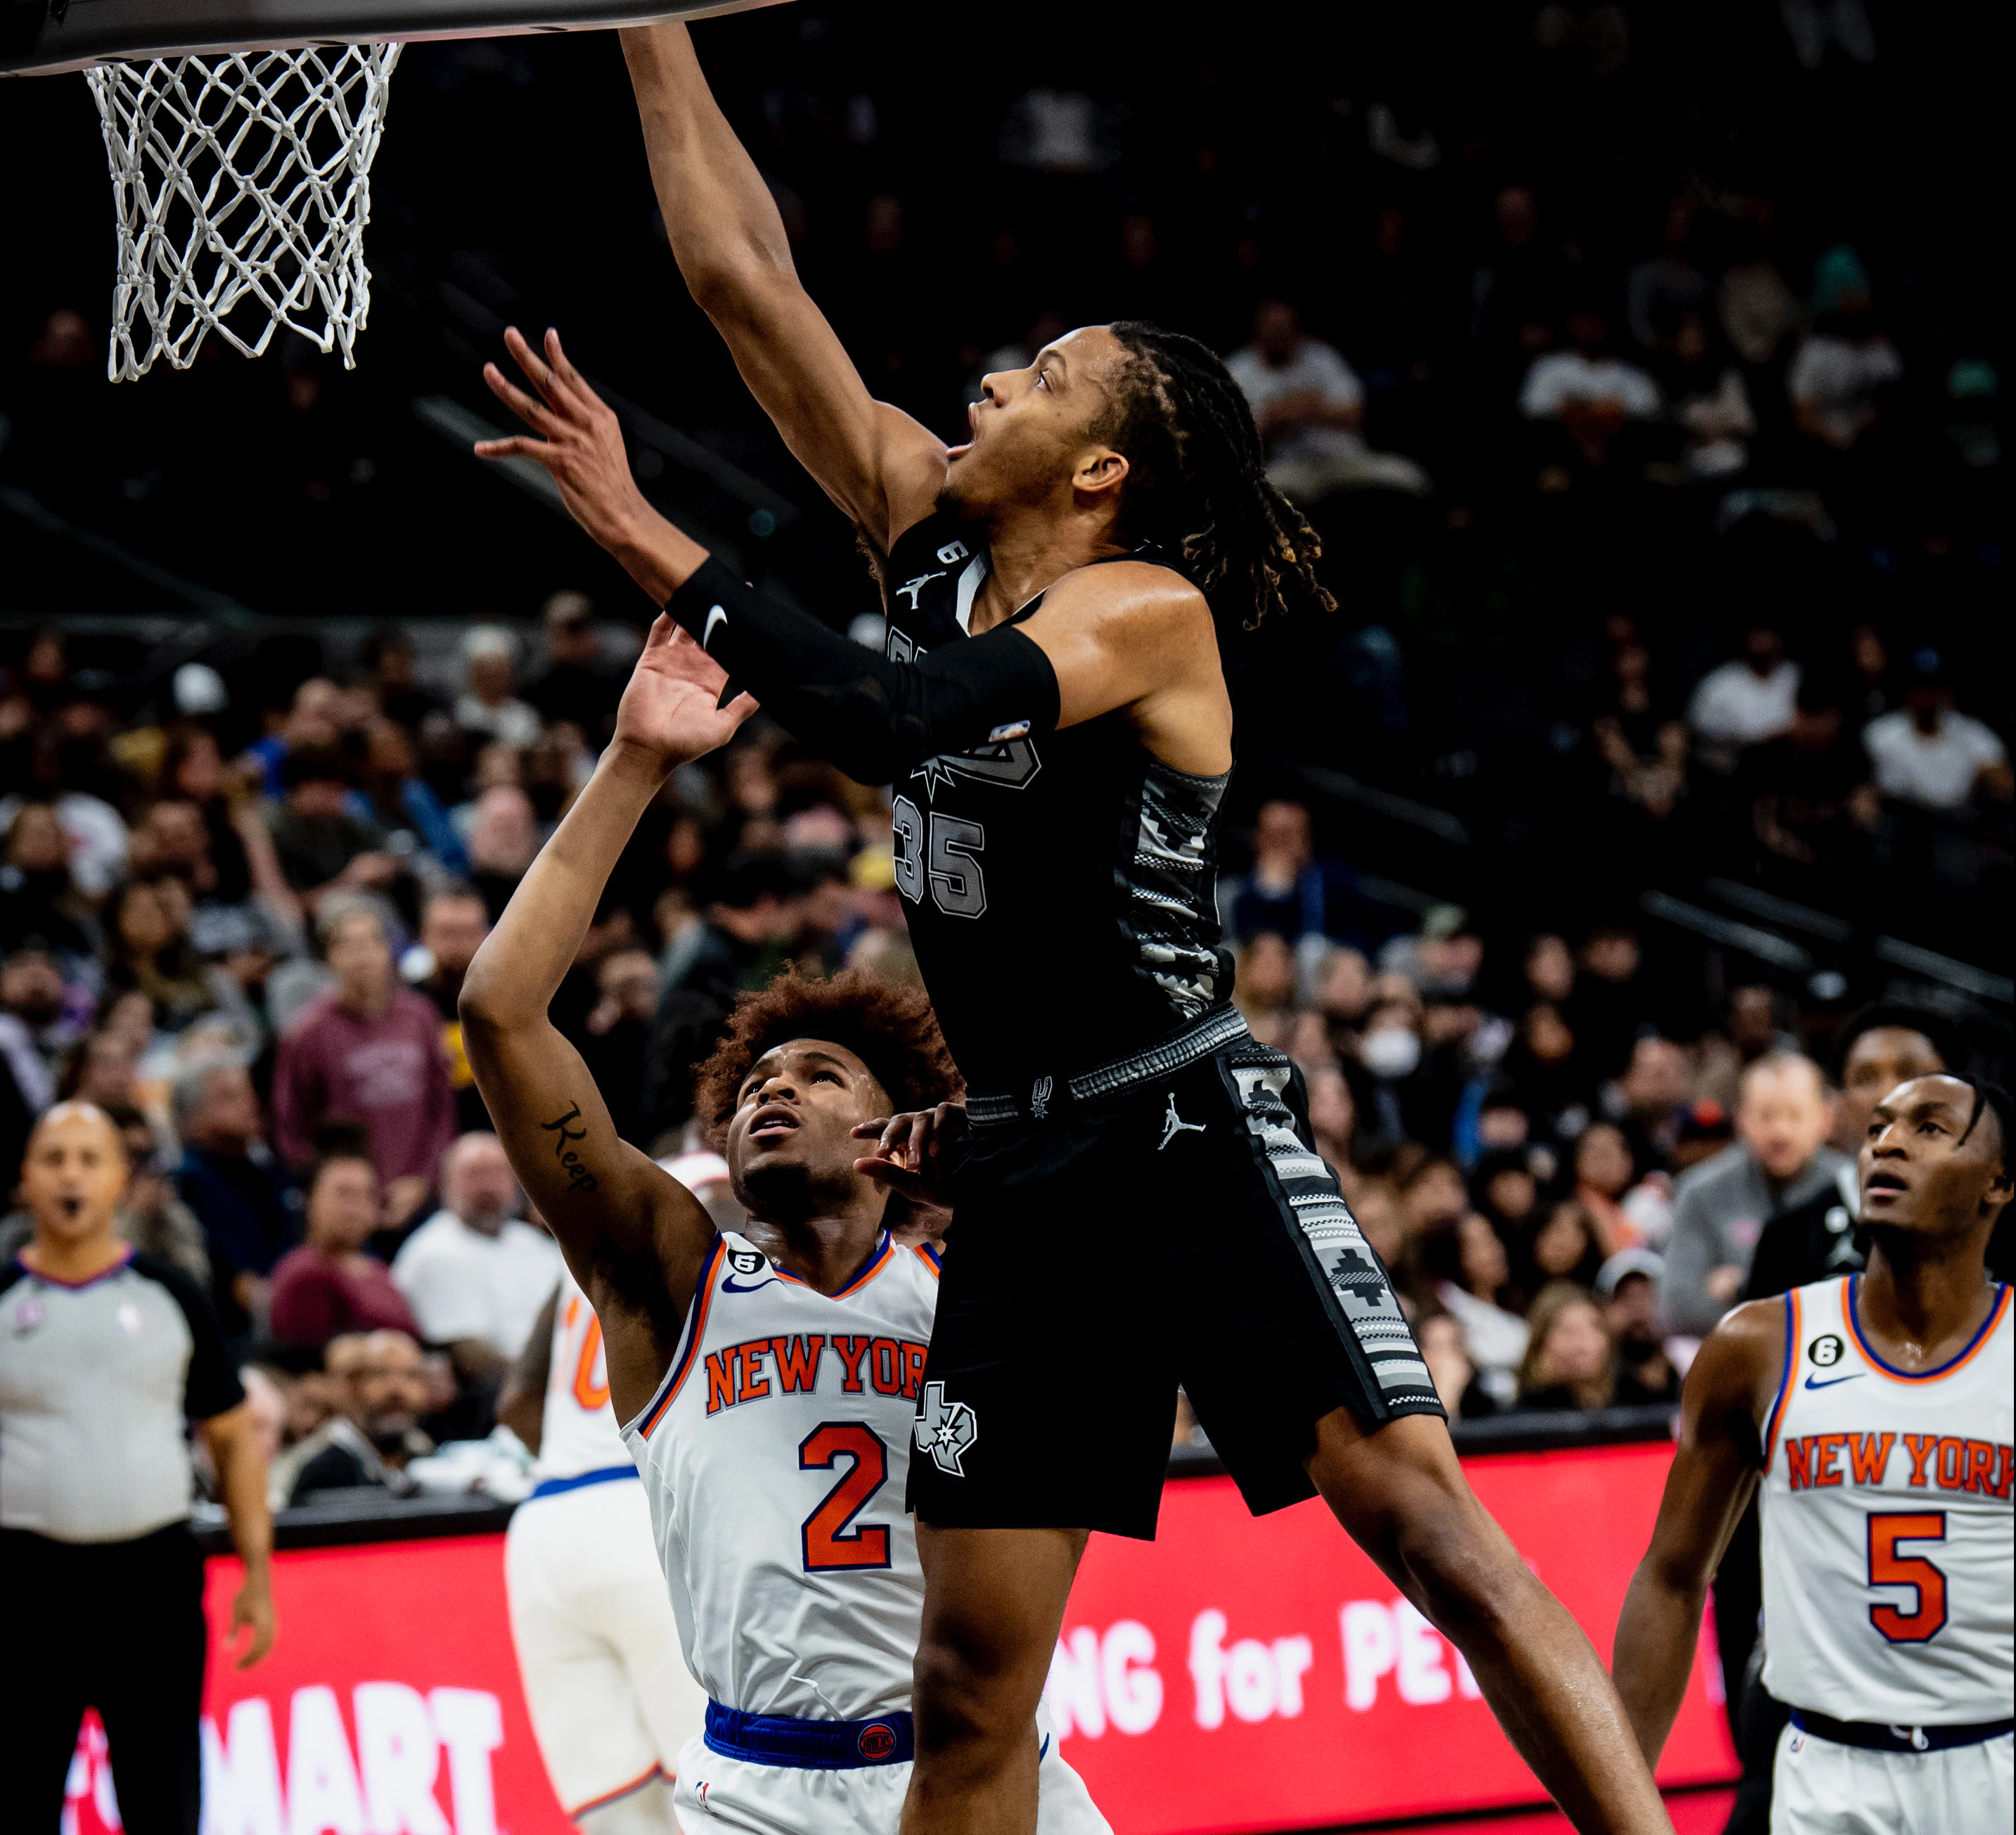 Spurs' Romeo Langford feeling wanted, ready to show his true self